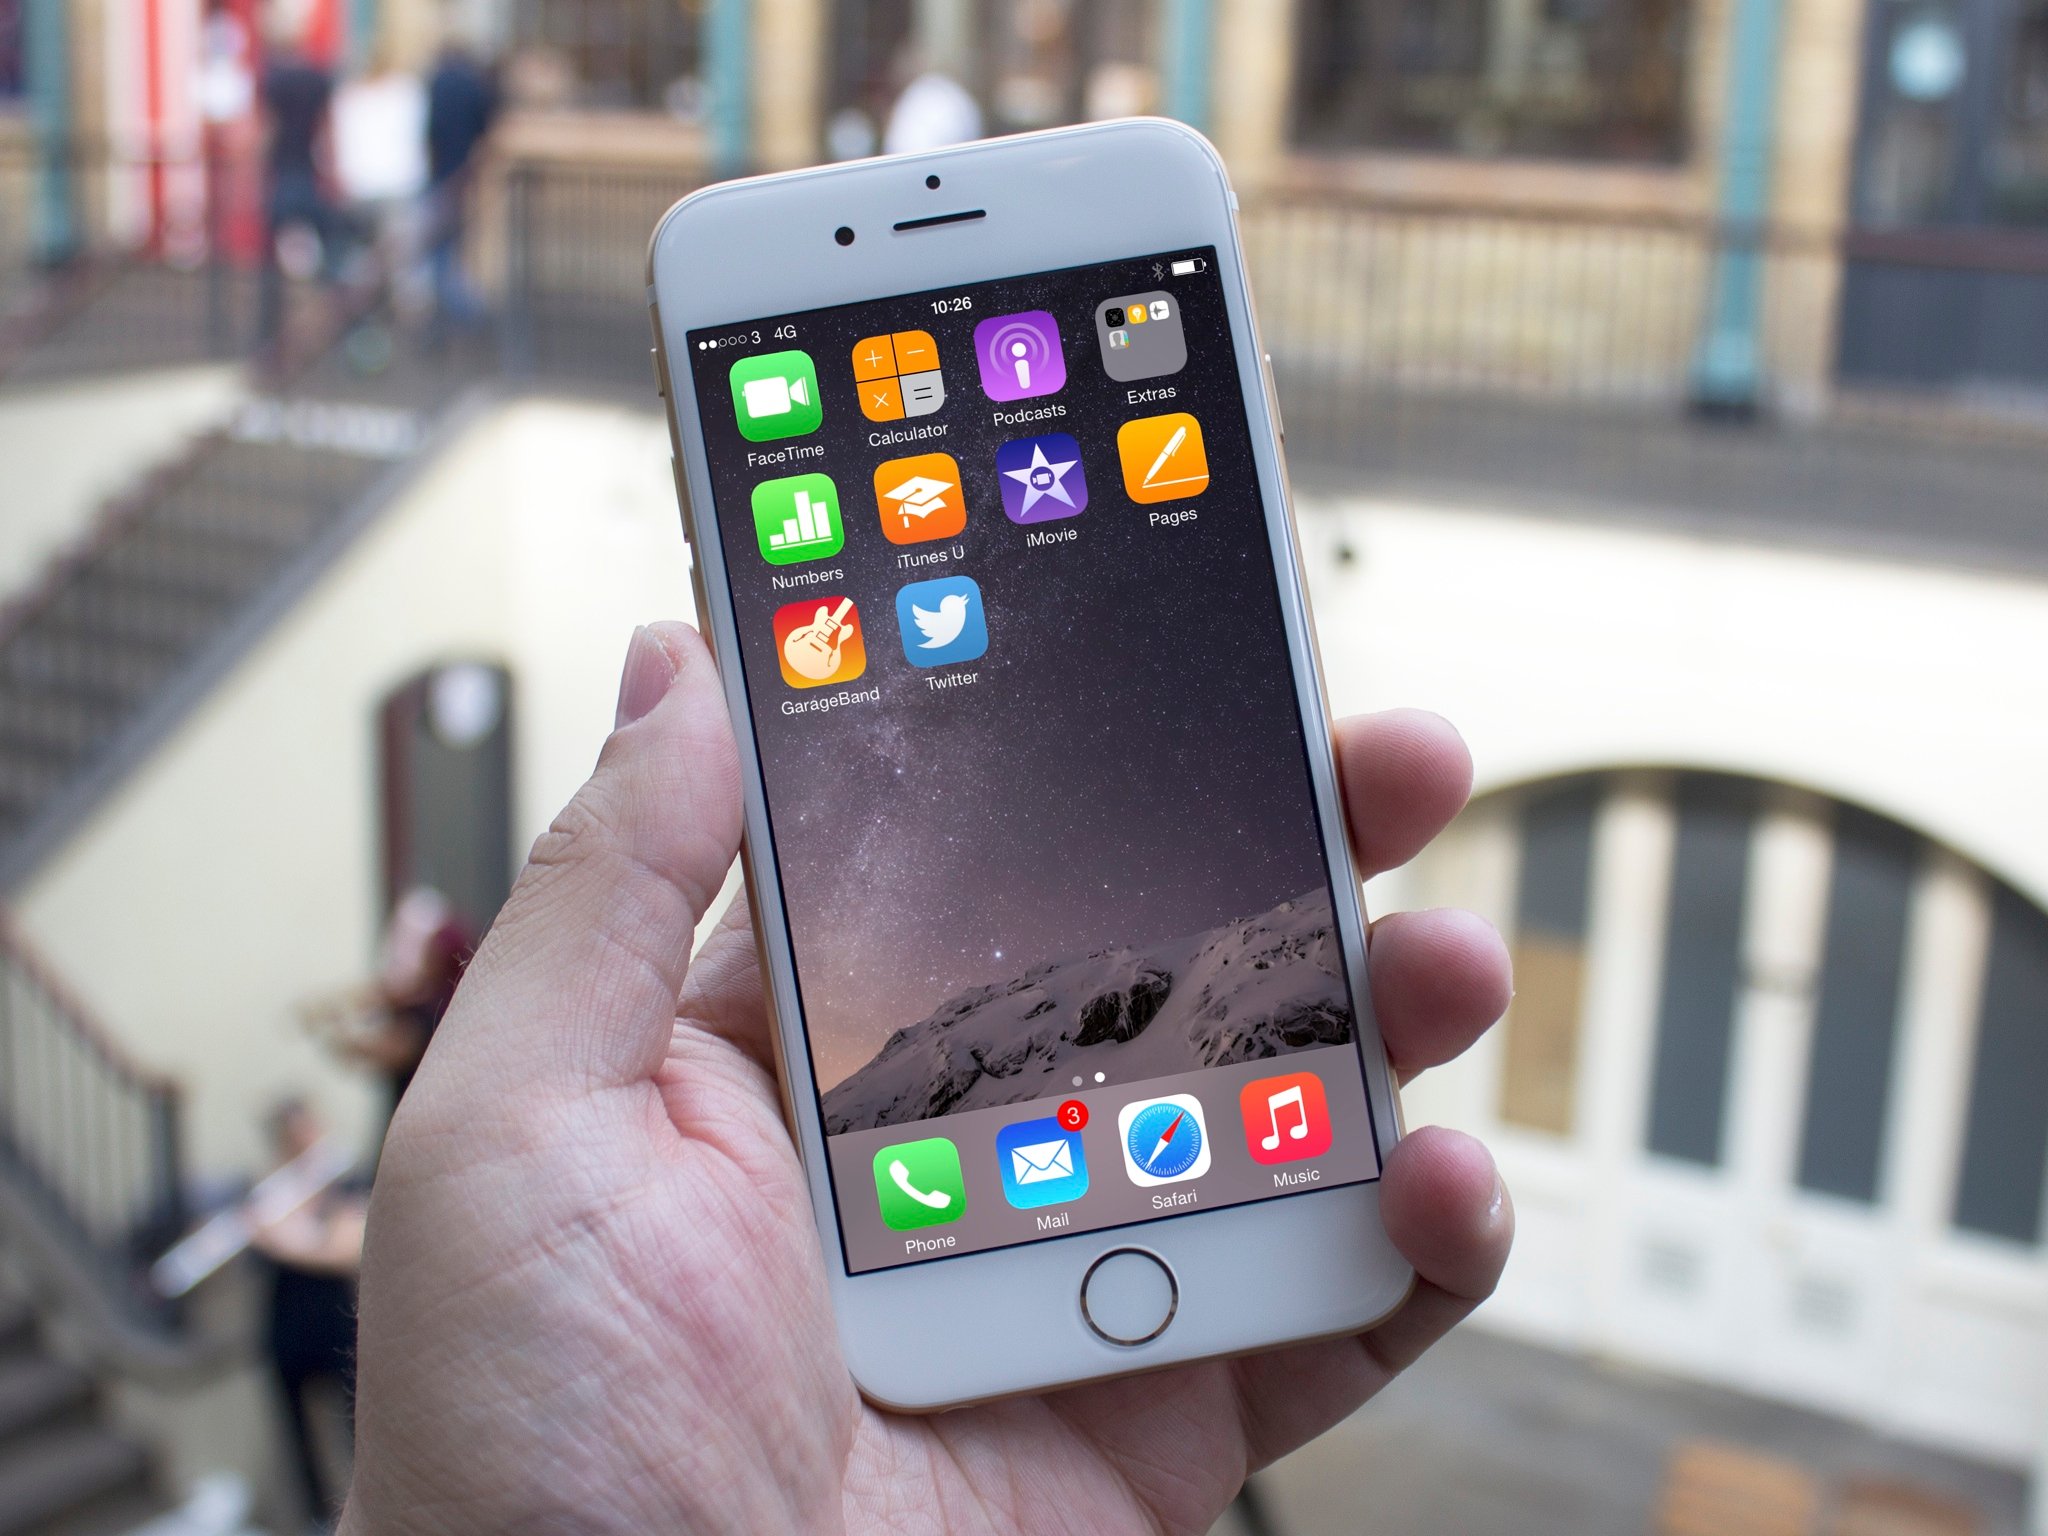 Yes, iWork apps are pre-installed on the 64GB and 128GB iPhone 6 and